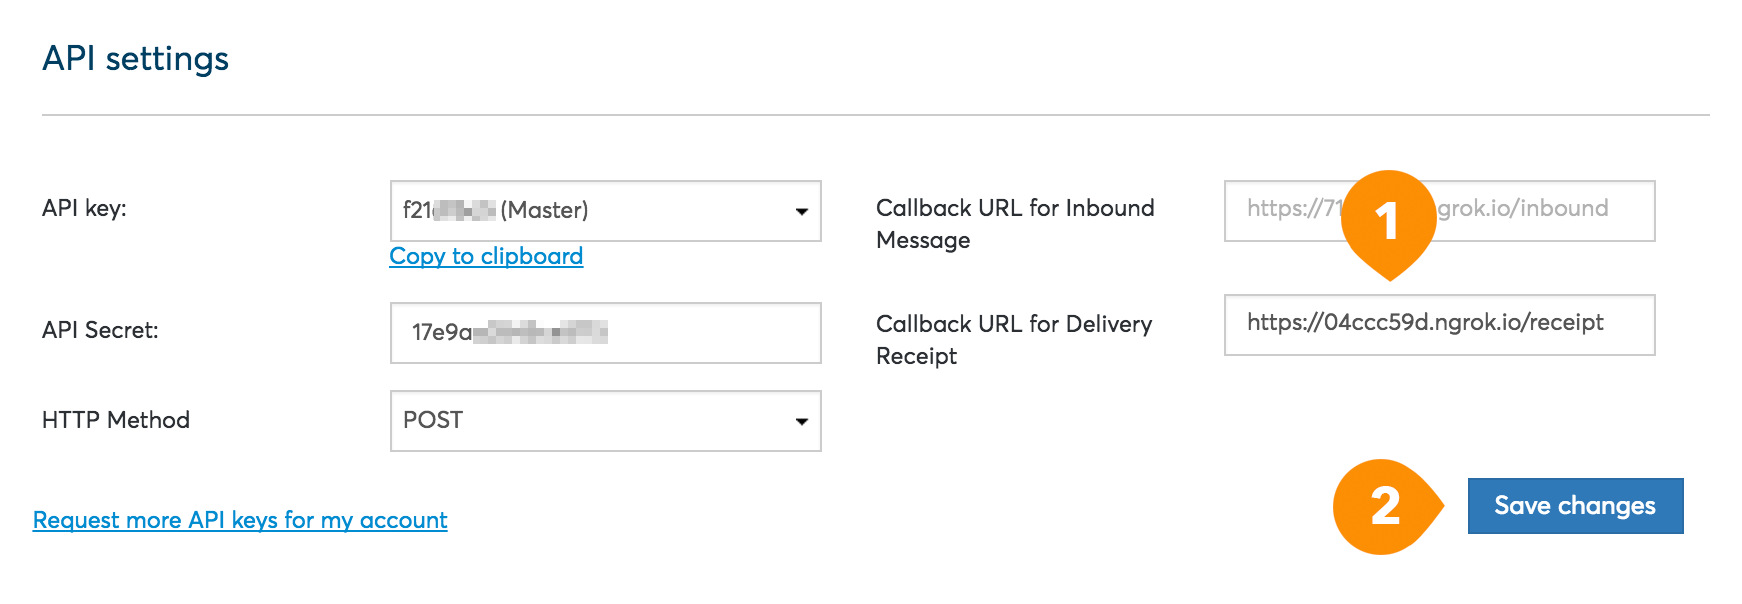 Nexmo Setting for ngrok Webhook endpoints